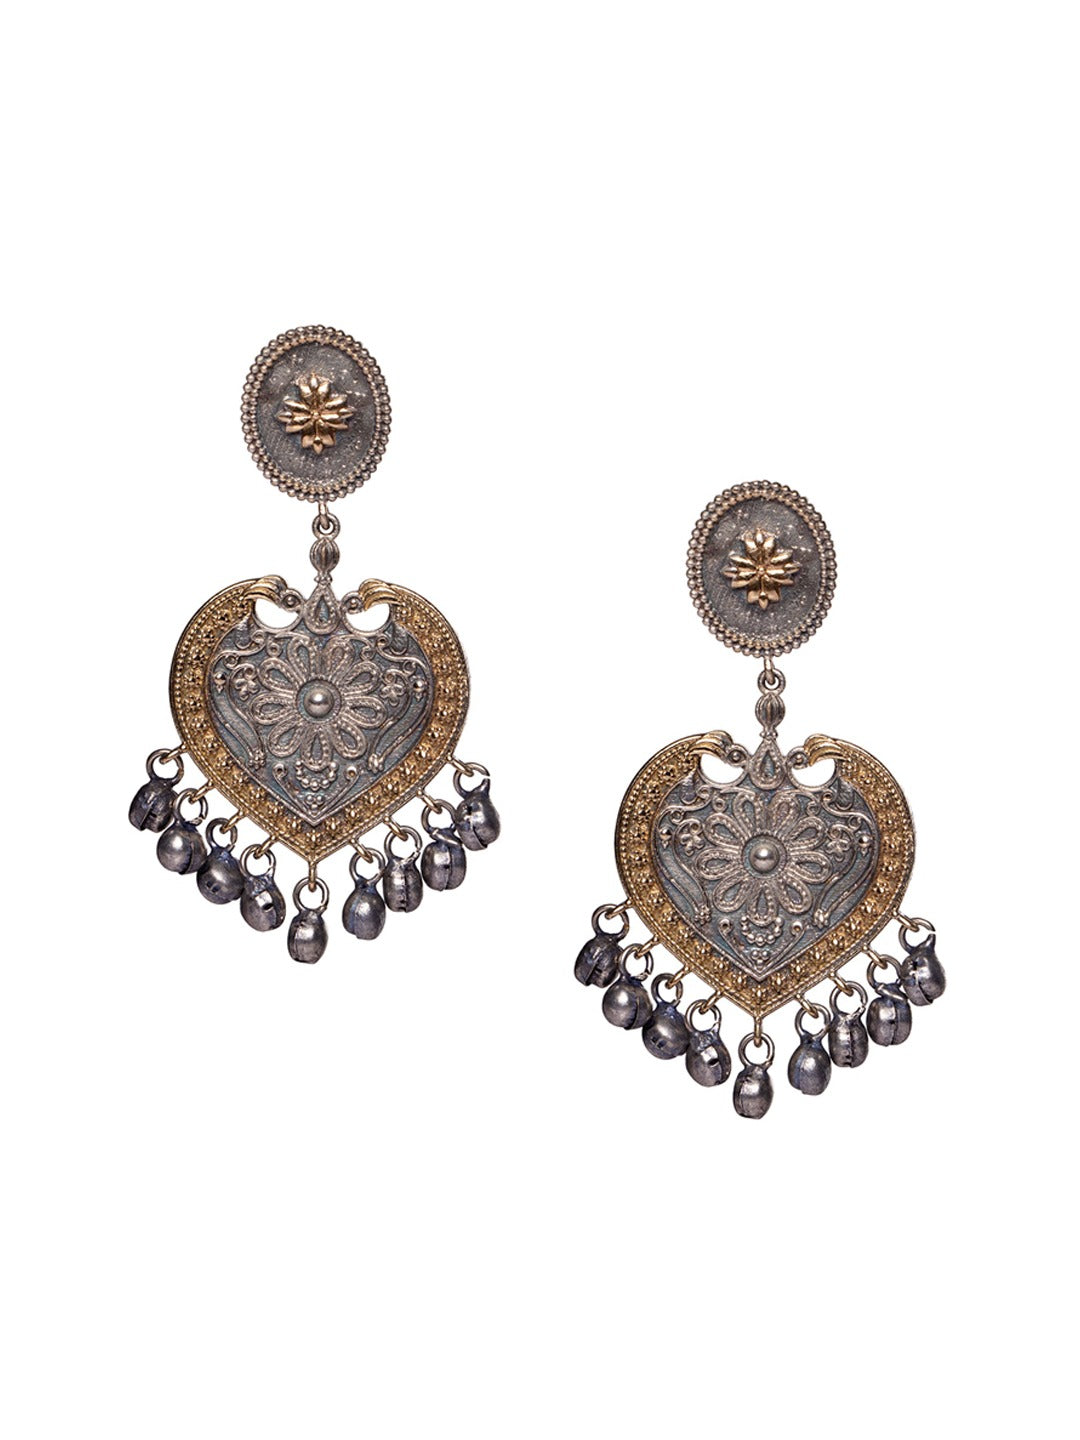 Women's Silver-Plated & Gold-Plated Contemporary Drop Earrings - Morkanth